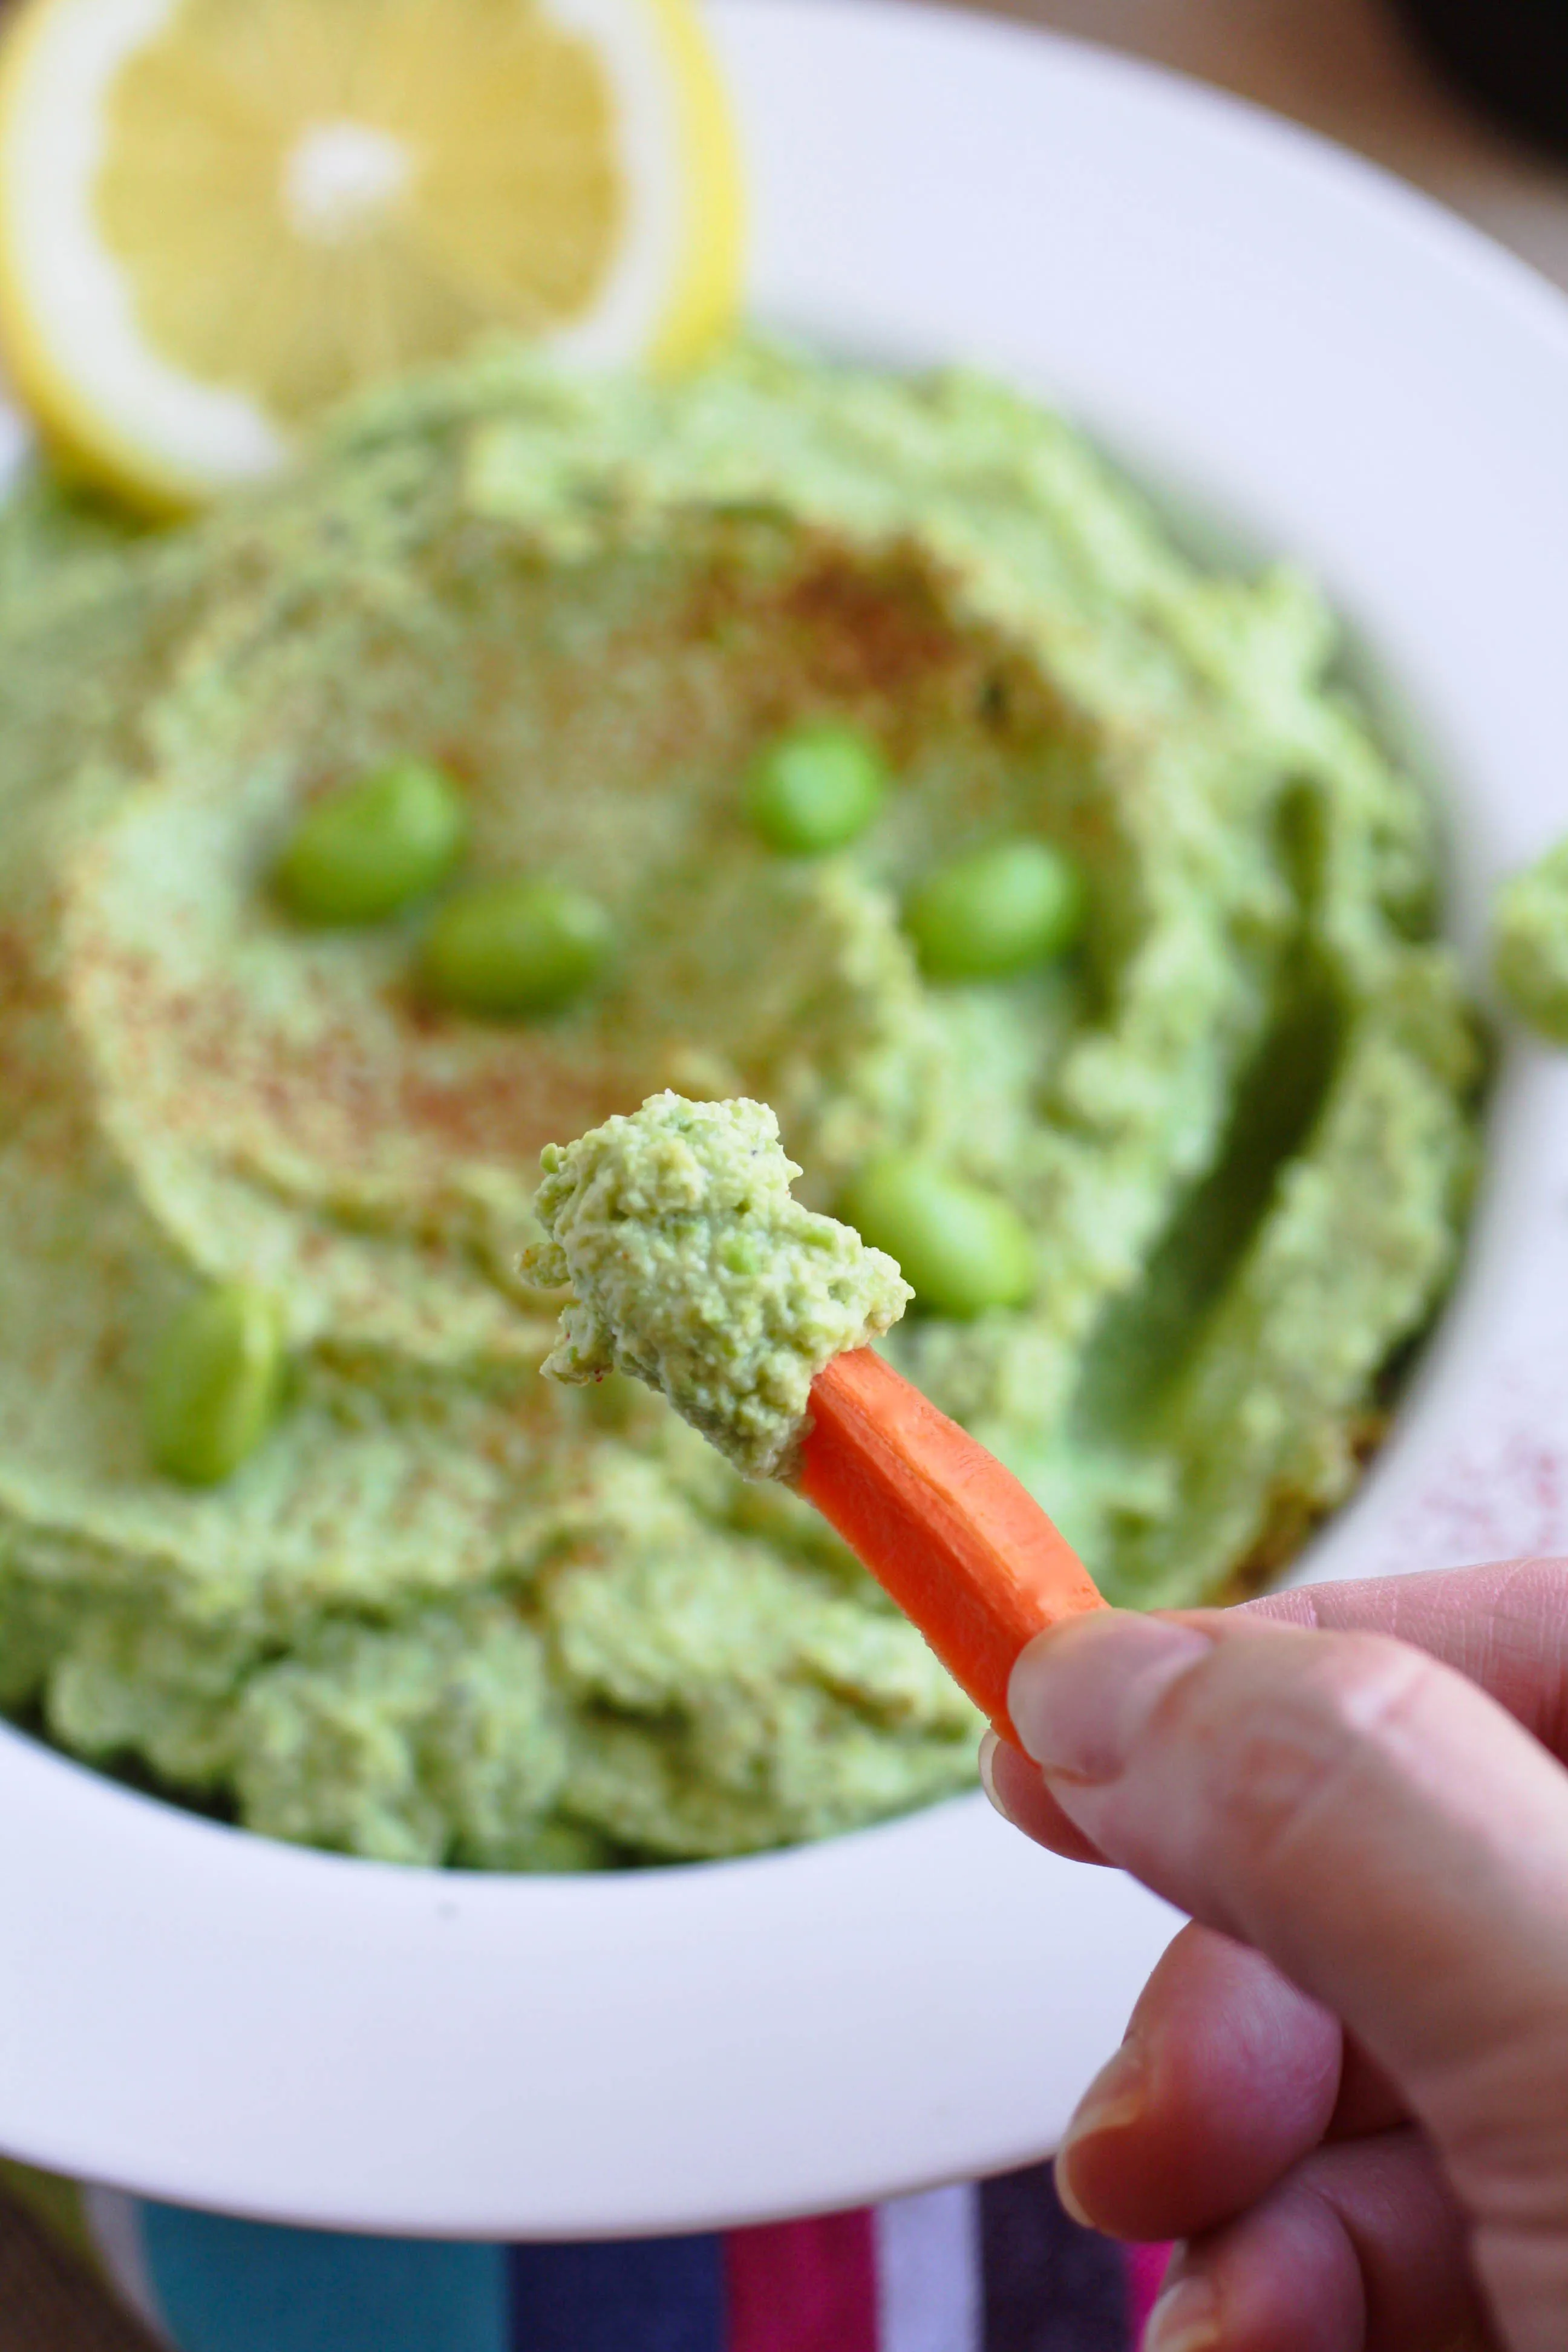 Easy Edamame-Pea Dip is the perfect snack to dig into any time! I love it as part of a light meal!